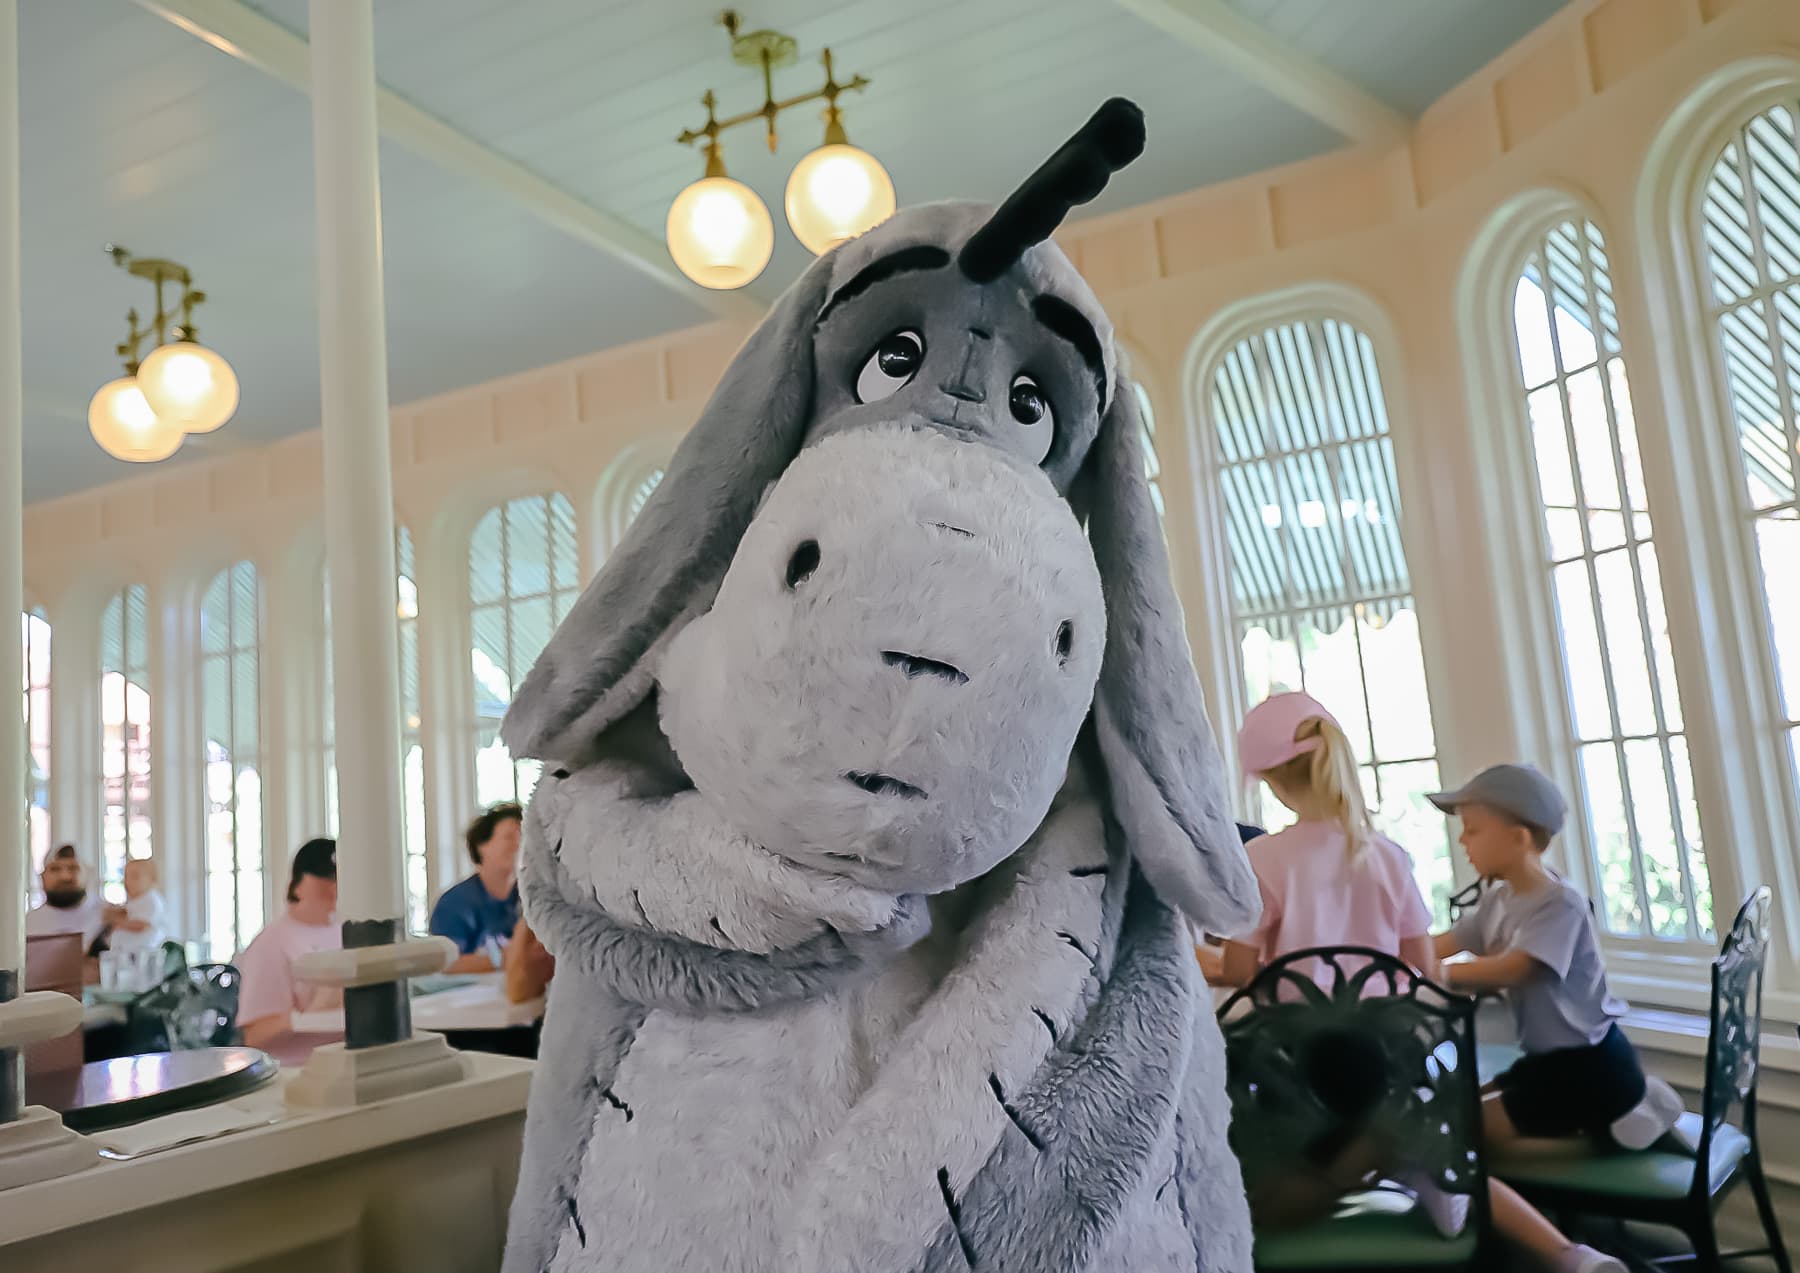 Eeyore poses for a photo at his character dining meal. 